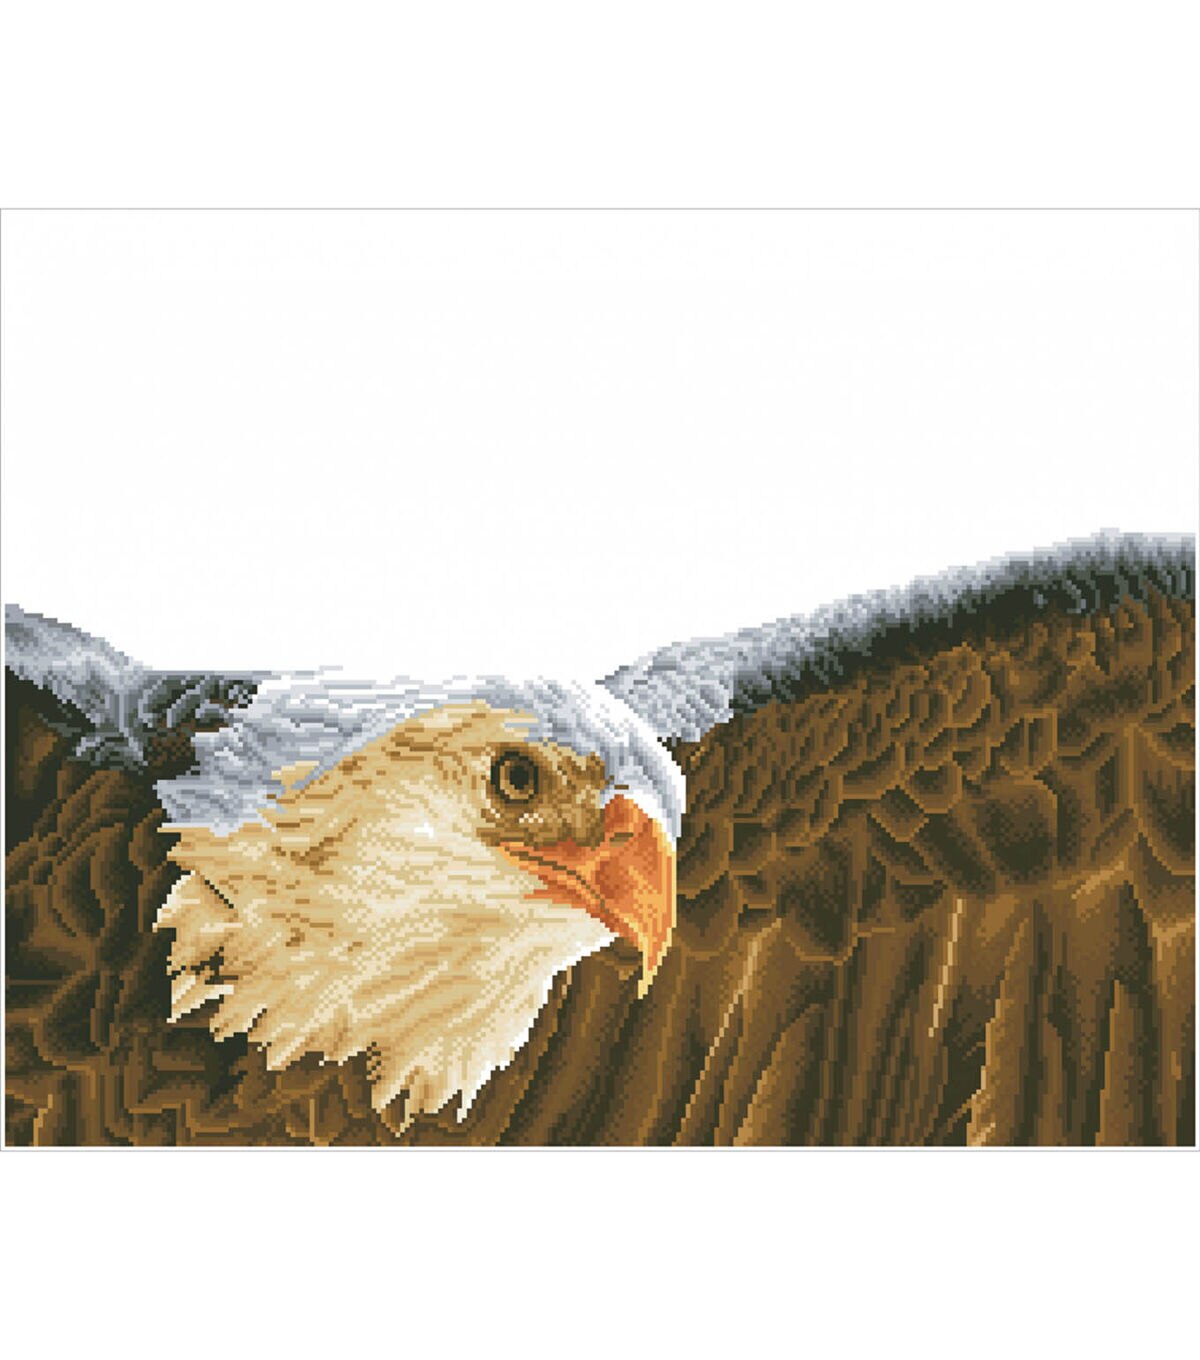 DIY 5D Diamond Painting Kit Full Diamond Embroidery Rhinestone Arts Craft Supply for Home Wall Decor Bald Eagle American Flag 15.7x11.8in 1 Pack by LAZODA 